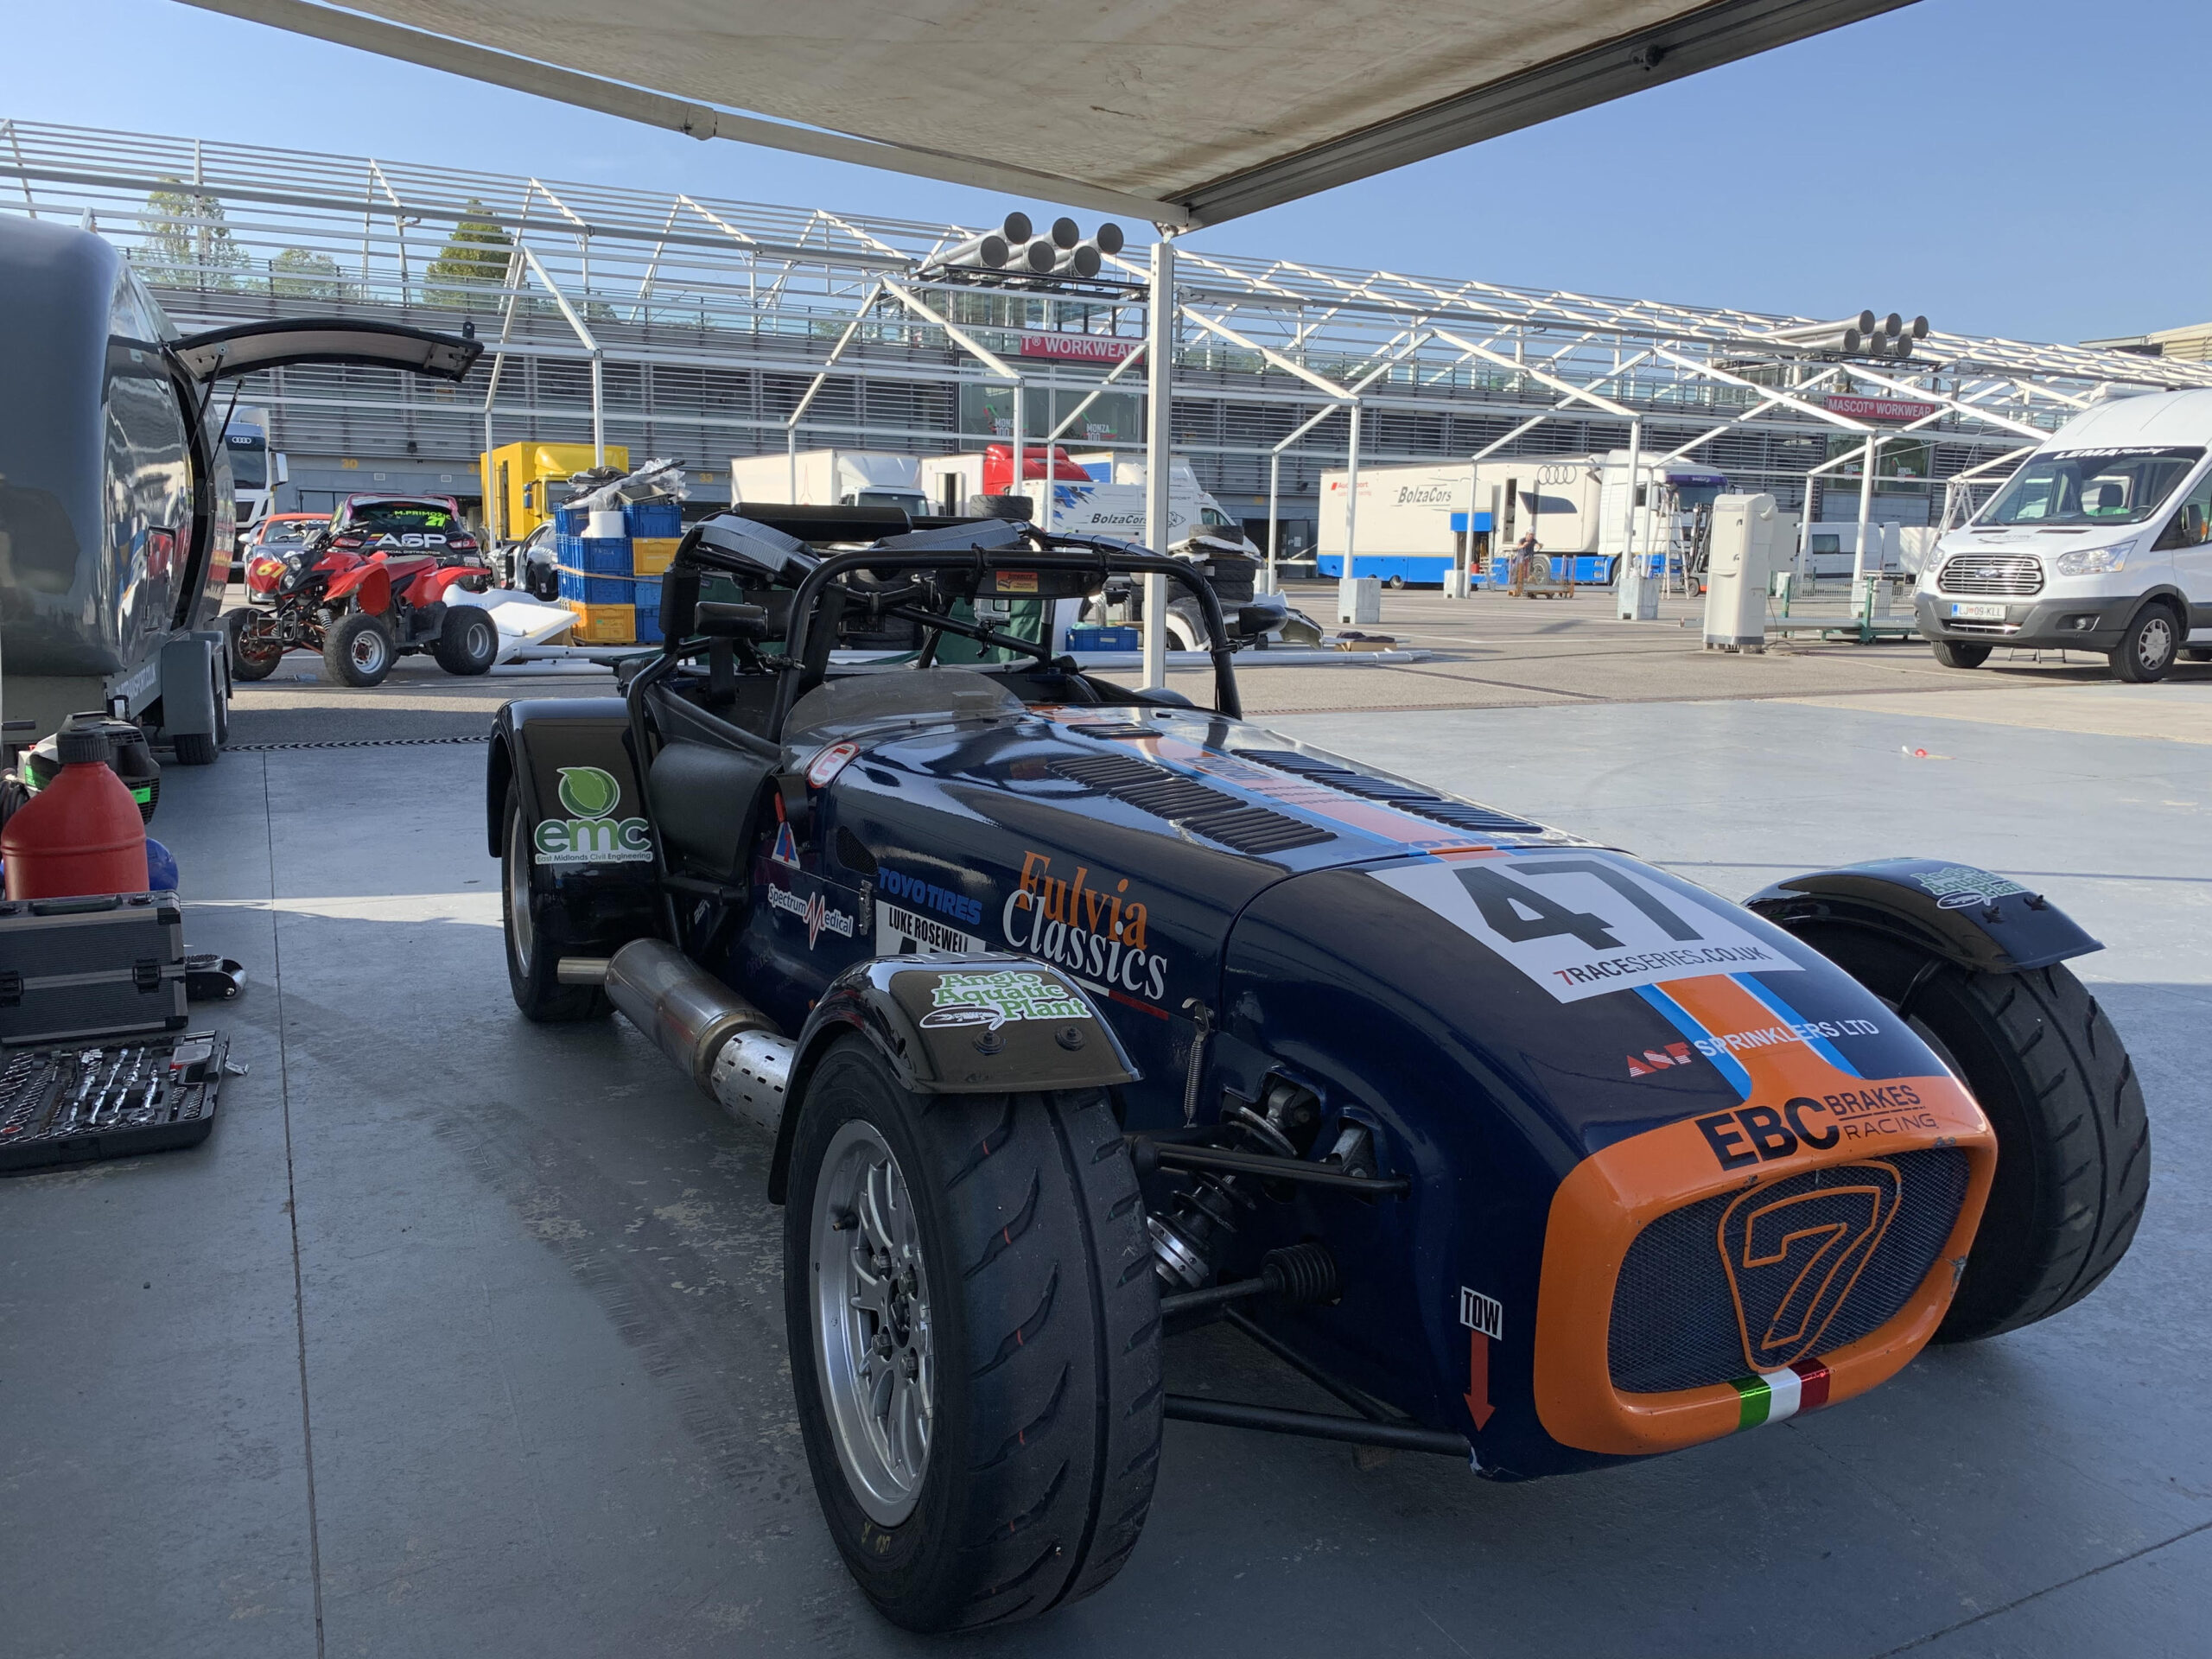 EBC RP-X™-Equipped Caterham Racer Wins at Monza